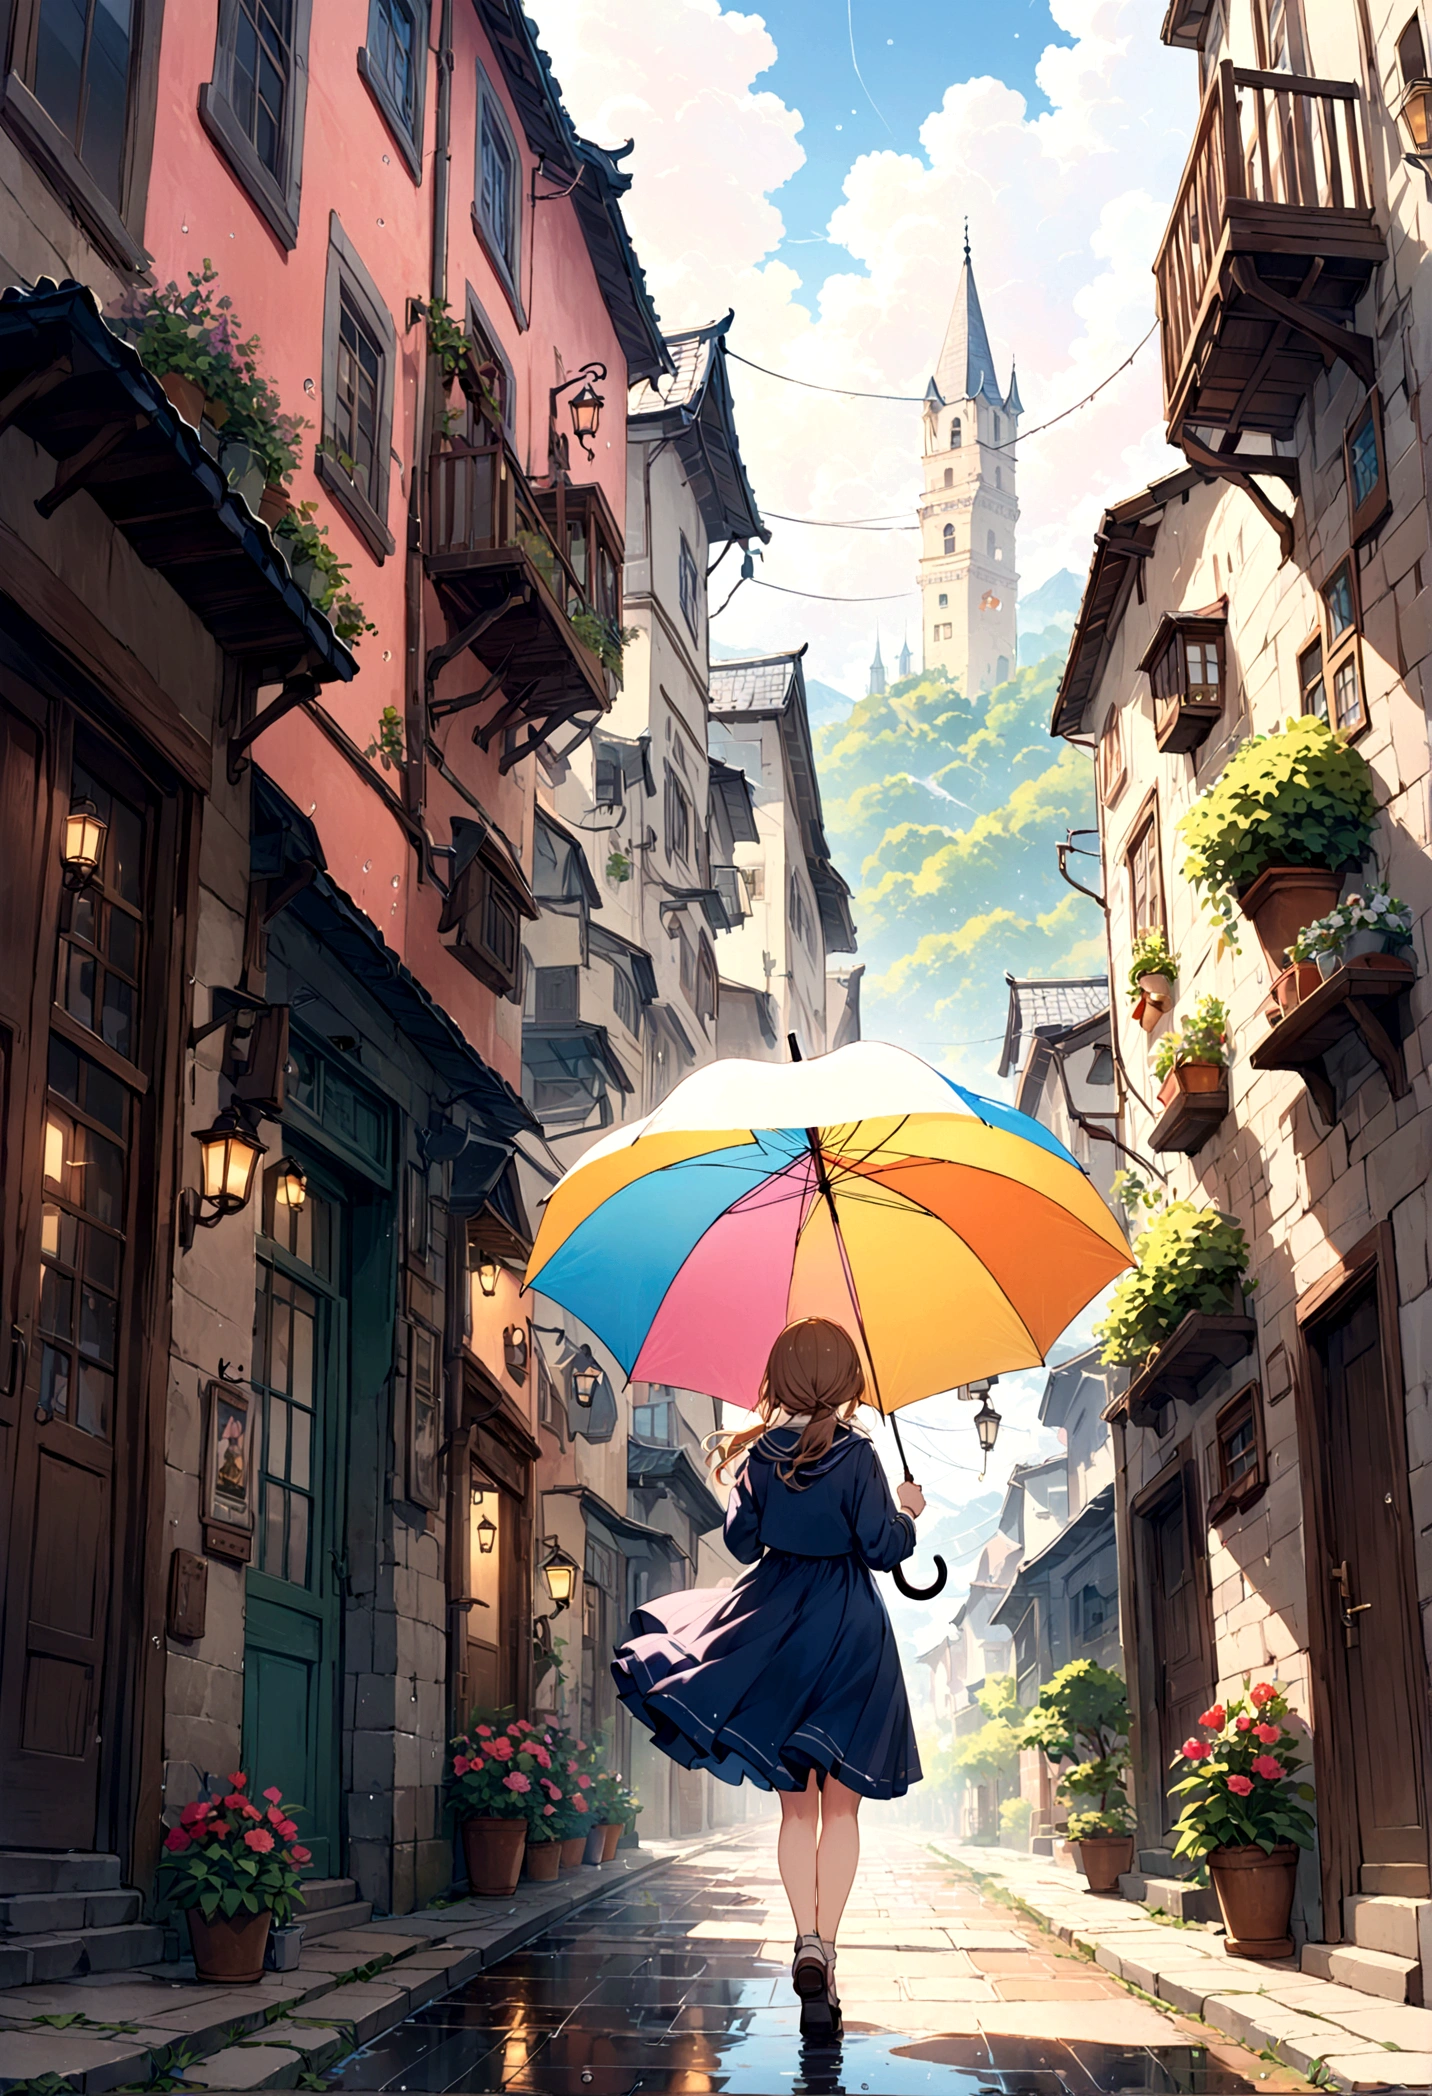 Cute illustration: landscape,Street corner on a rainy day,A landscape like something out of a picture book,Emotional,Girl is walking,BREAK,(Girl with an umbrella),umbrella,Anatomically correct,BREAK,Create an artistic background,Add a drop pattern to the background,The street is colorful, Fairytale-like,This is a cute illustration like a dream.,Blur the lines of the water droplets for an artistic look.,Intricate details,Wide range of colors,artwork,rendering,(masterpiece:1.3),(Highest quality:1.4),(Very detailedな:1.5),High resolution,Very detailed,unity 8k wallpaper,Structurally correct,cute